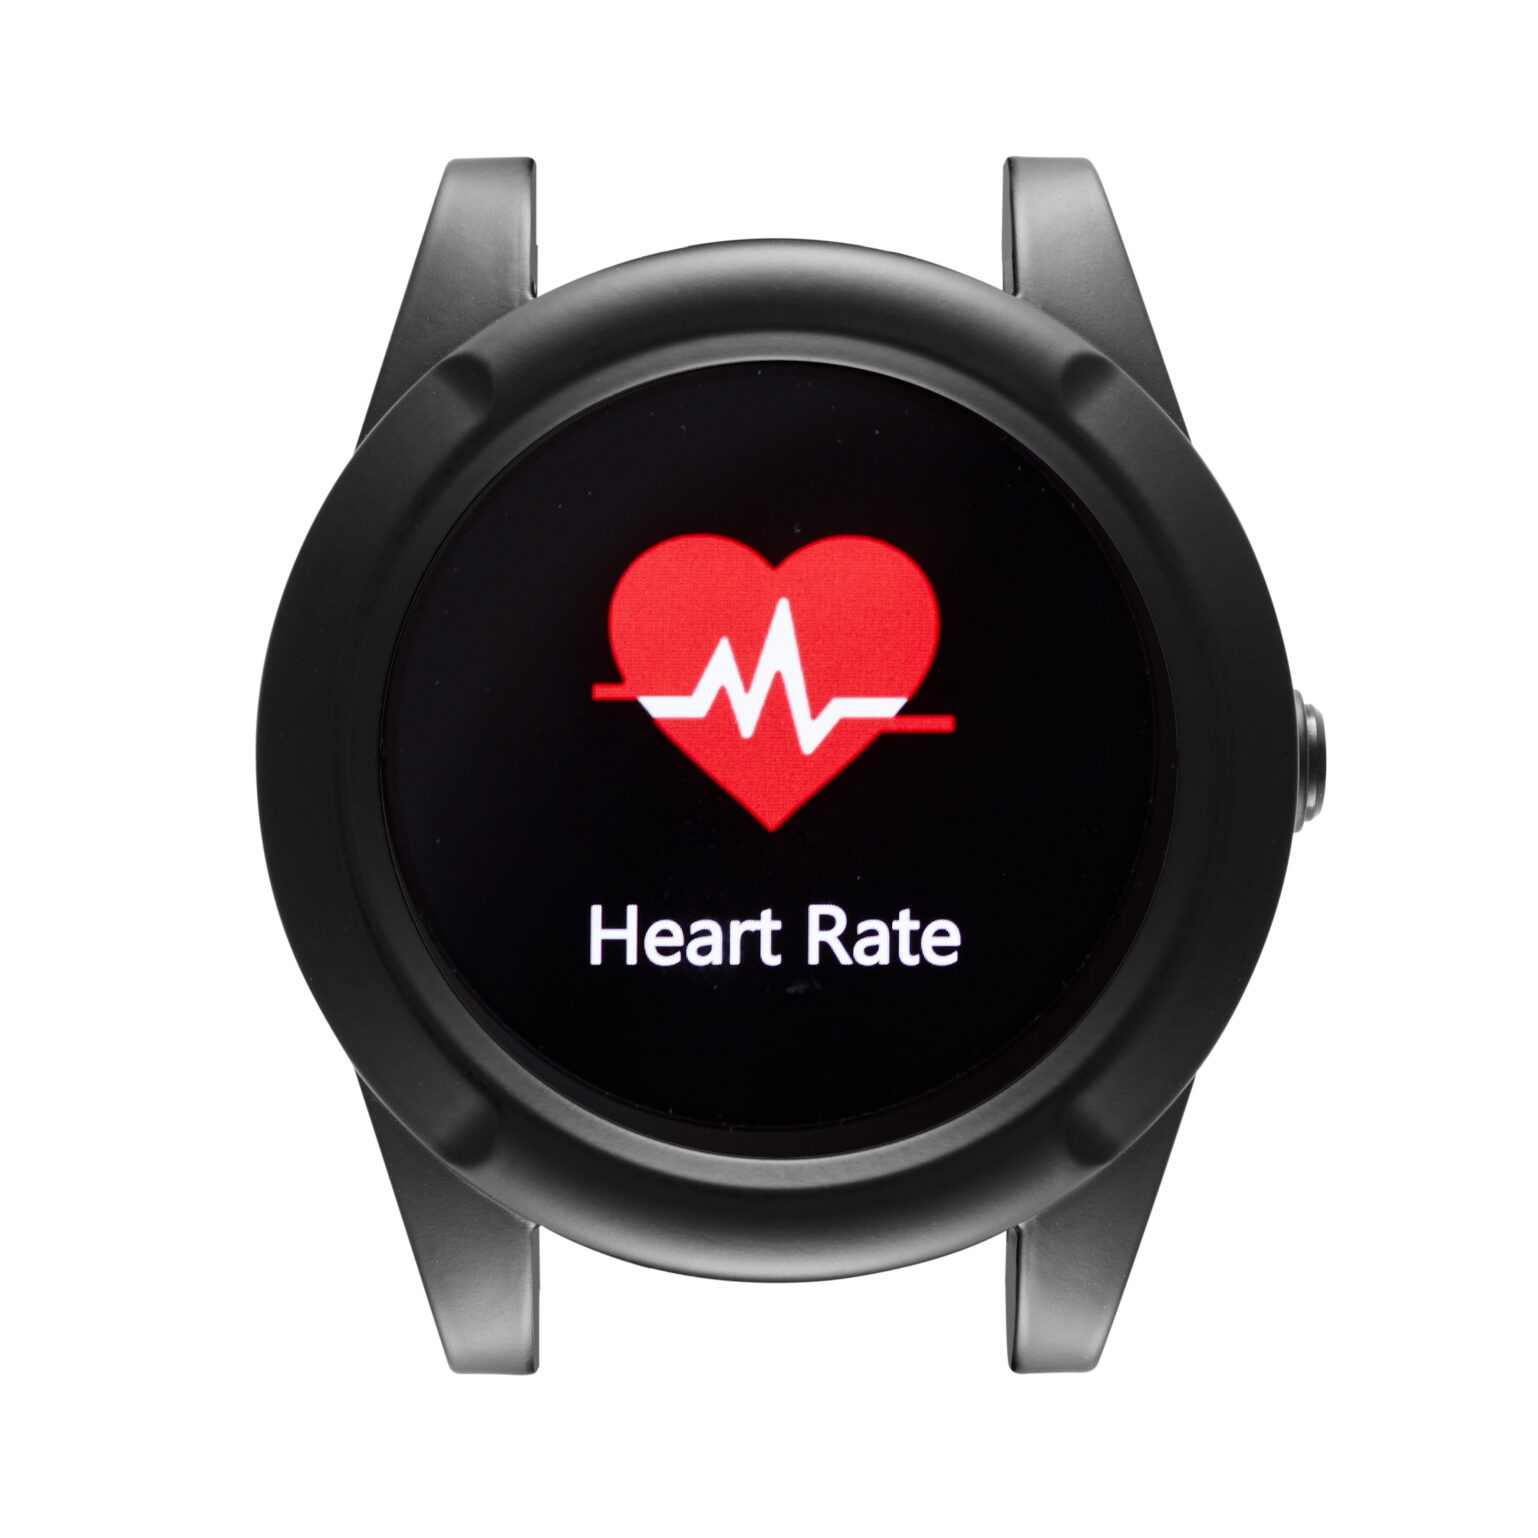 Heart rate monitor device, Curome Health Monitor